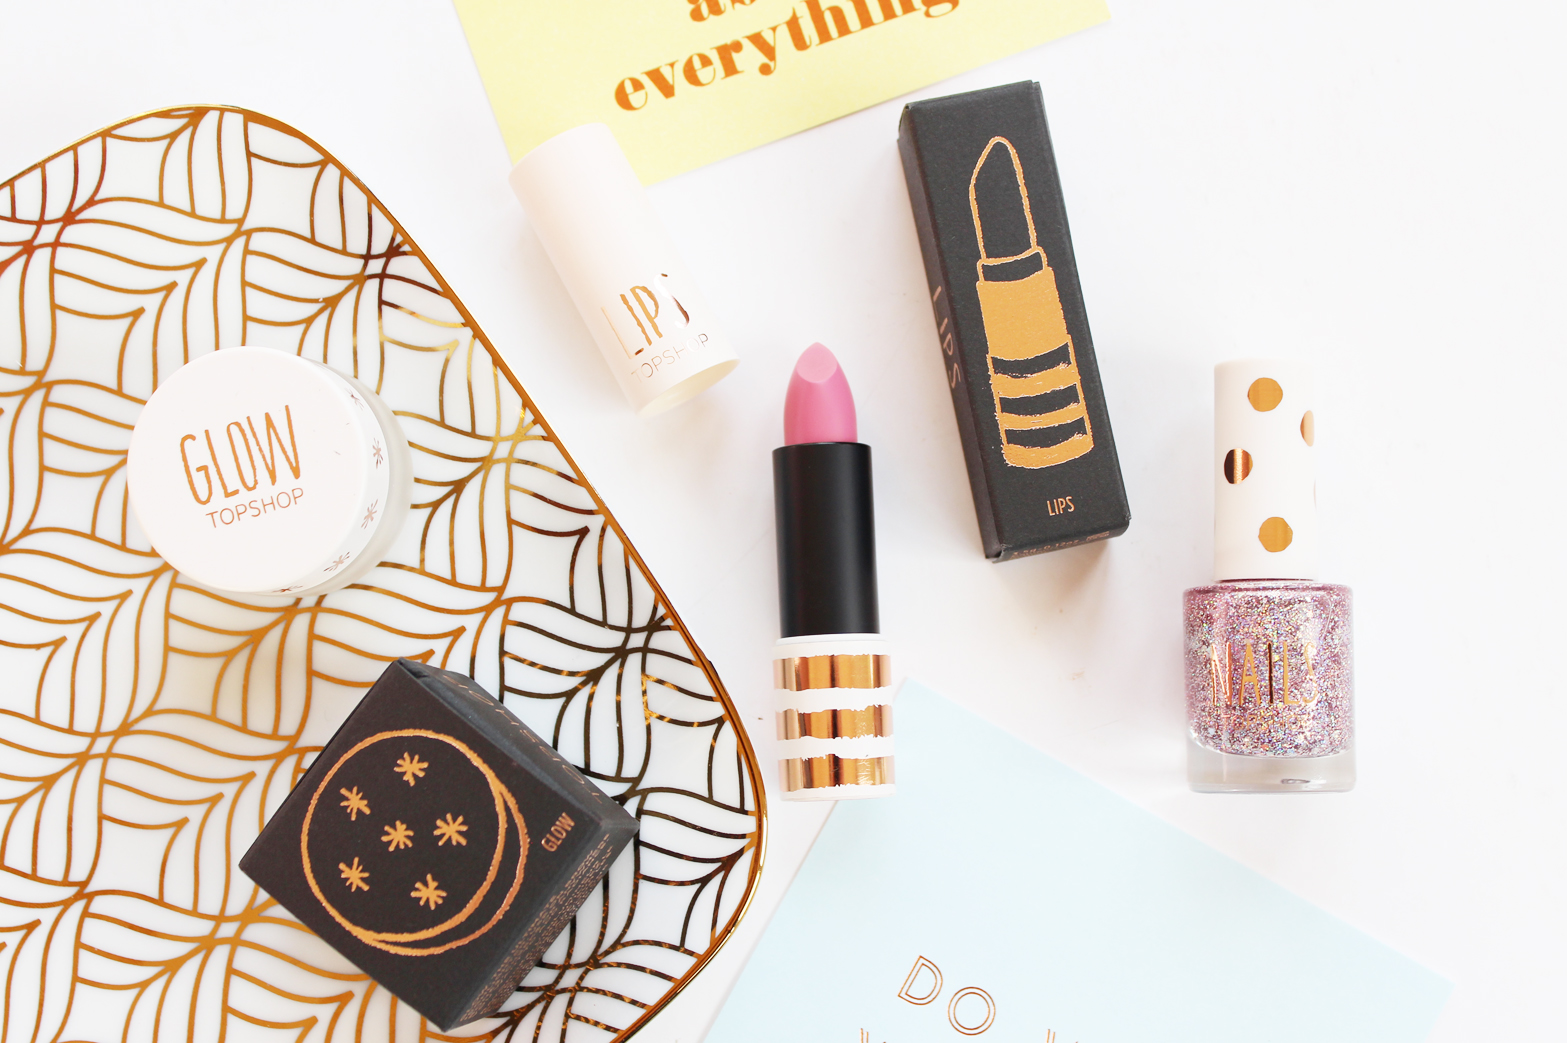 TOPSHOP | 5 Years of Beauty Haul - Glow Pot in Polished, Lipstick in Innocent + Nail Polish in Adrenalin - CassandraMyee